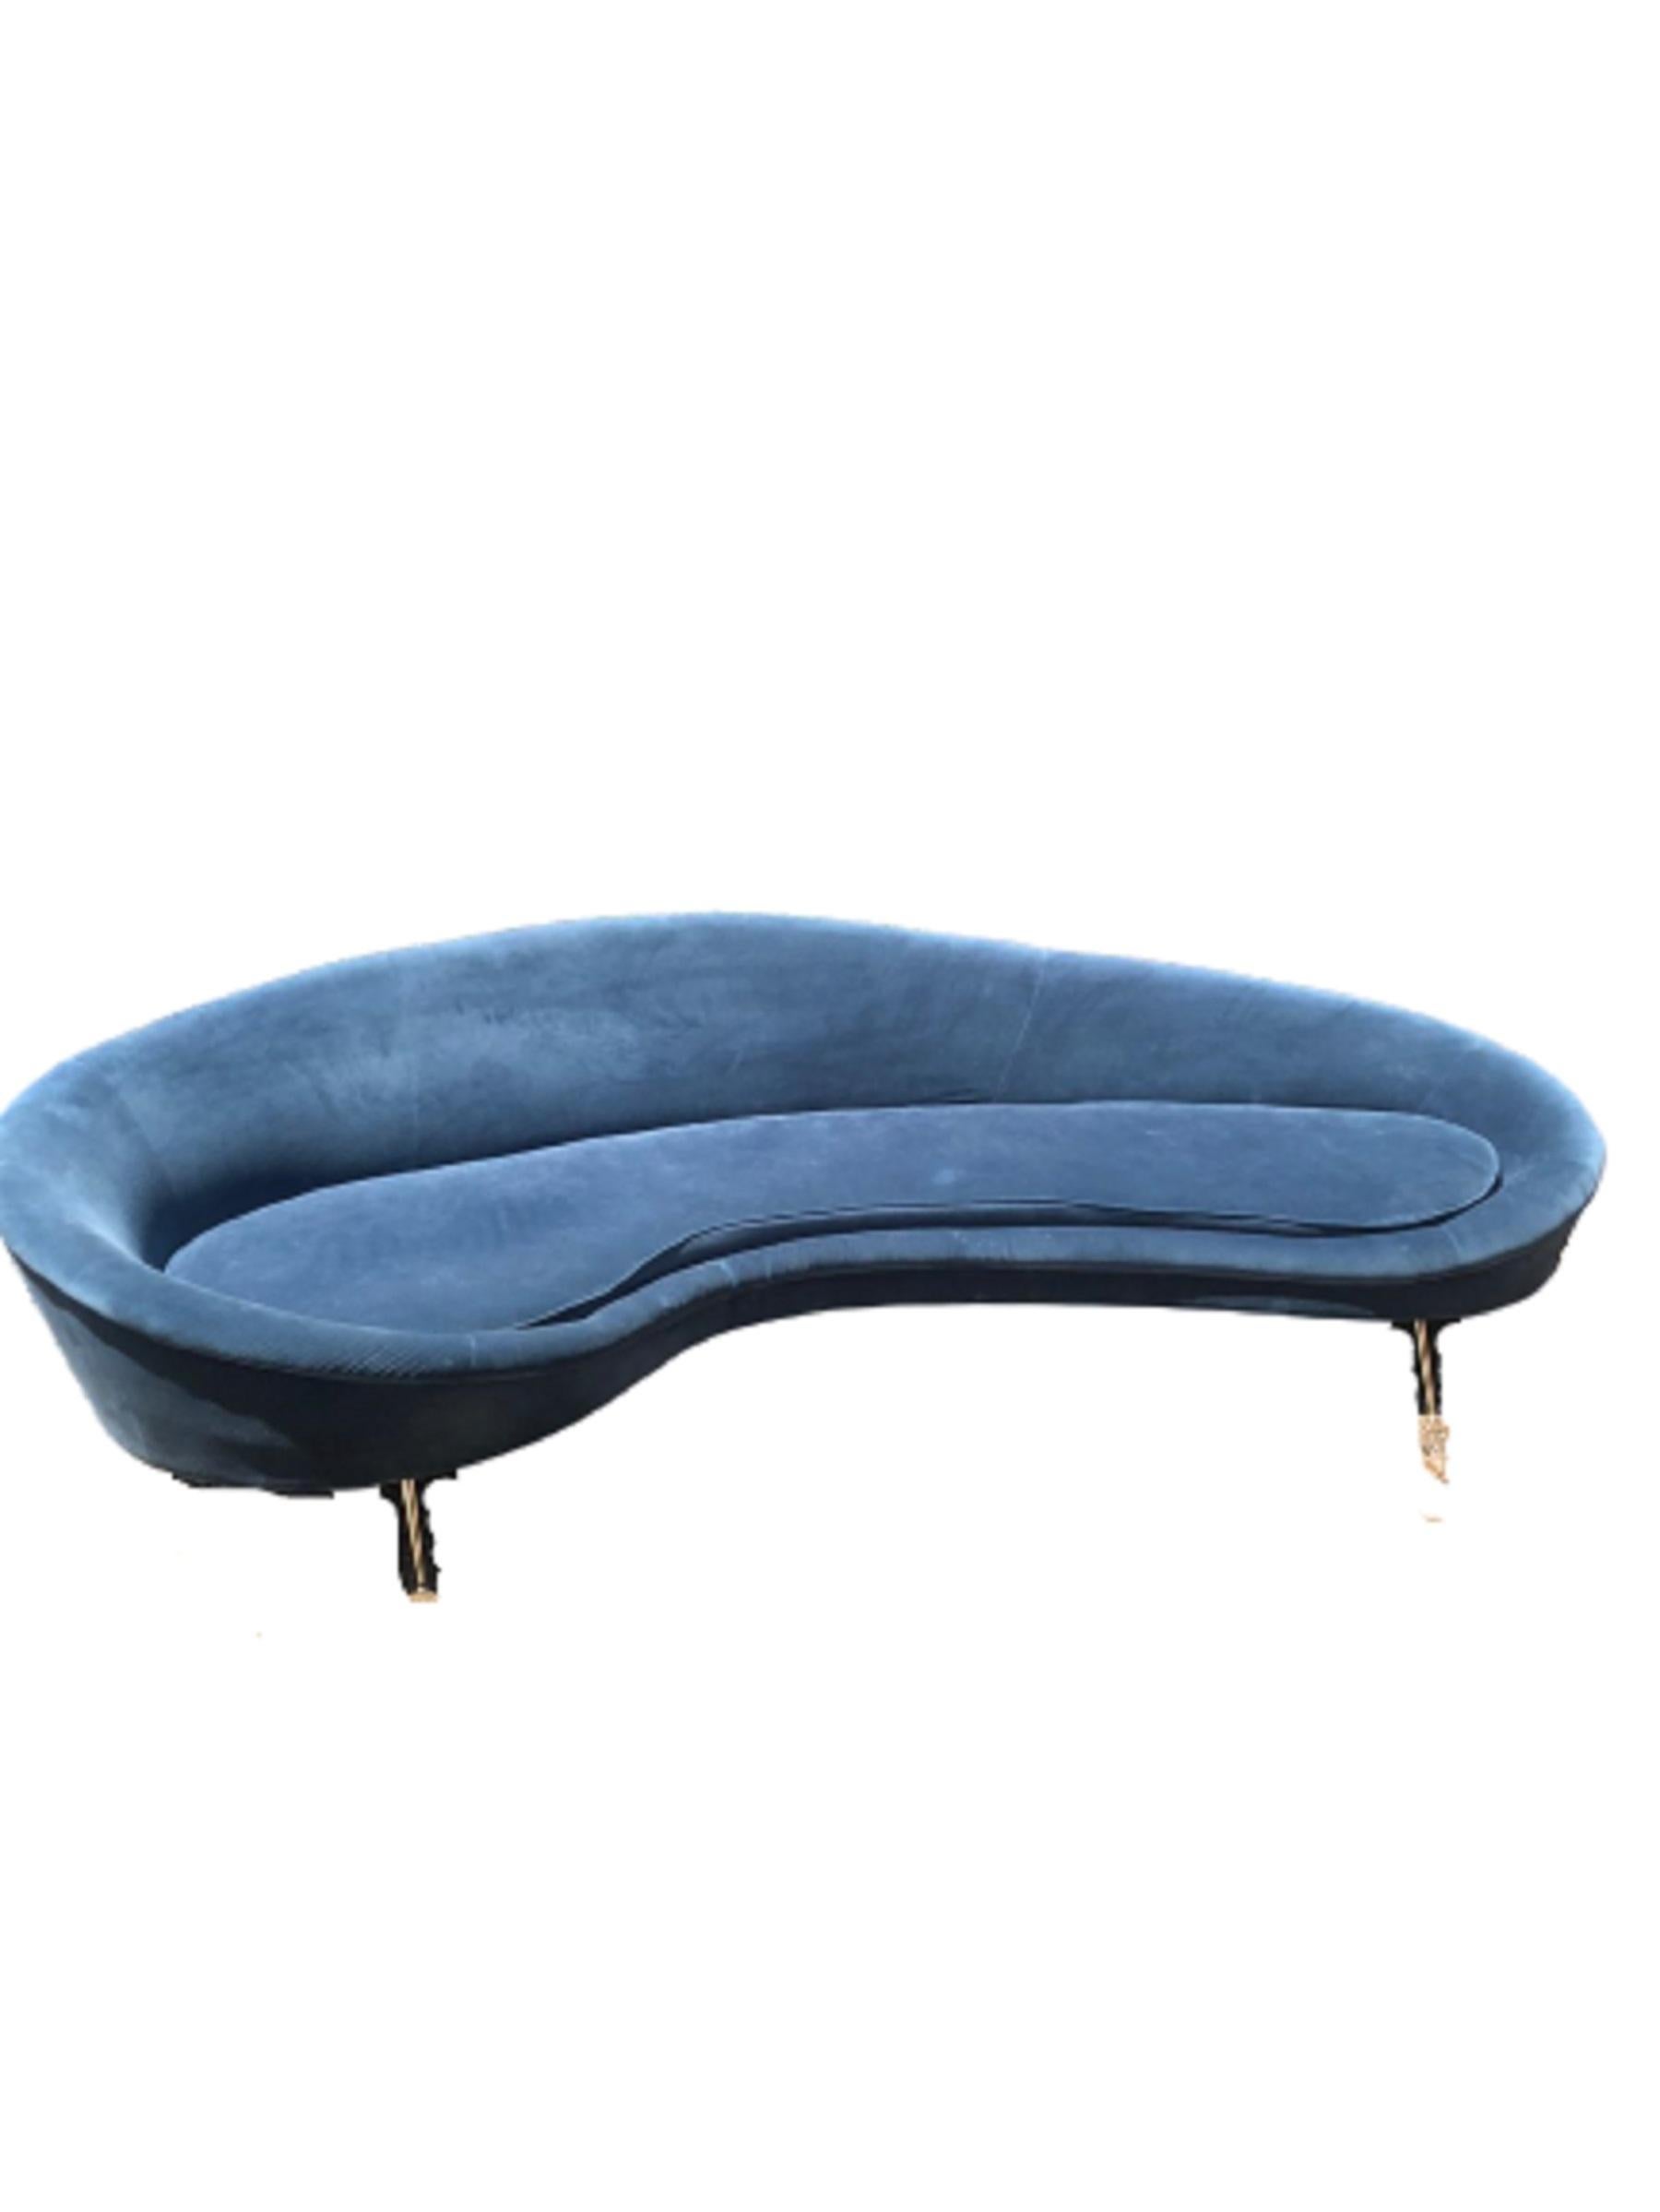 Federico Munari Italy  Sofa  Velvet and Polished Solid Brass Curved  1950 7